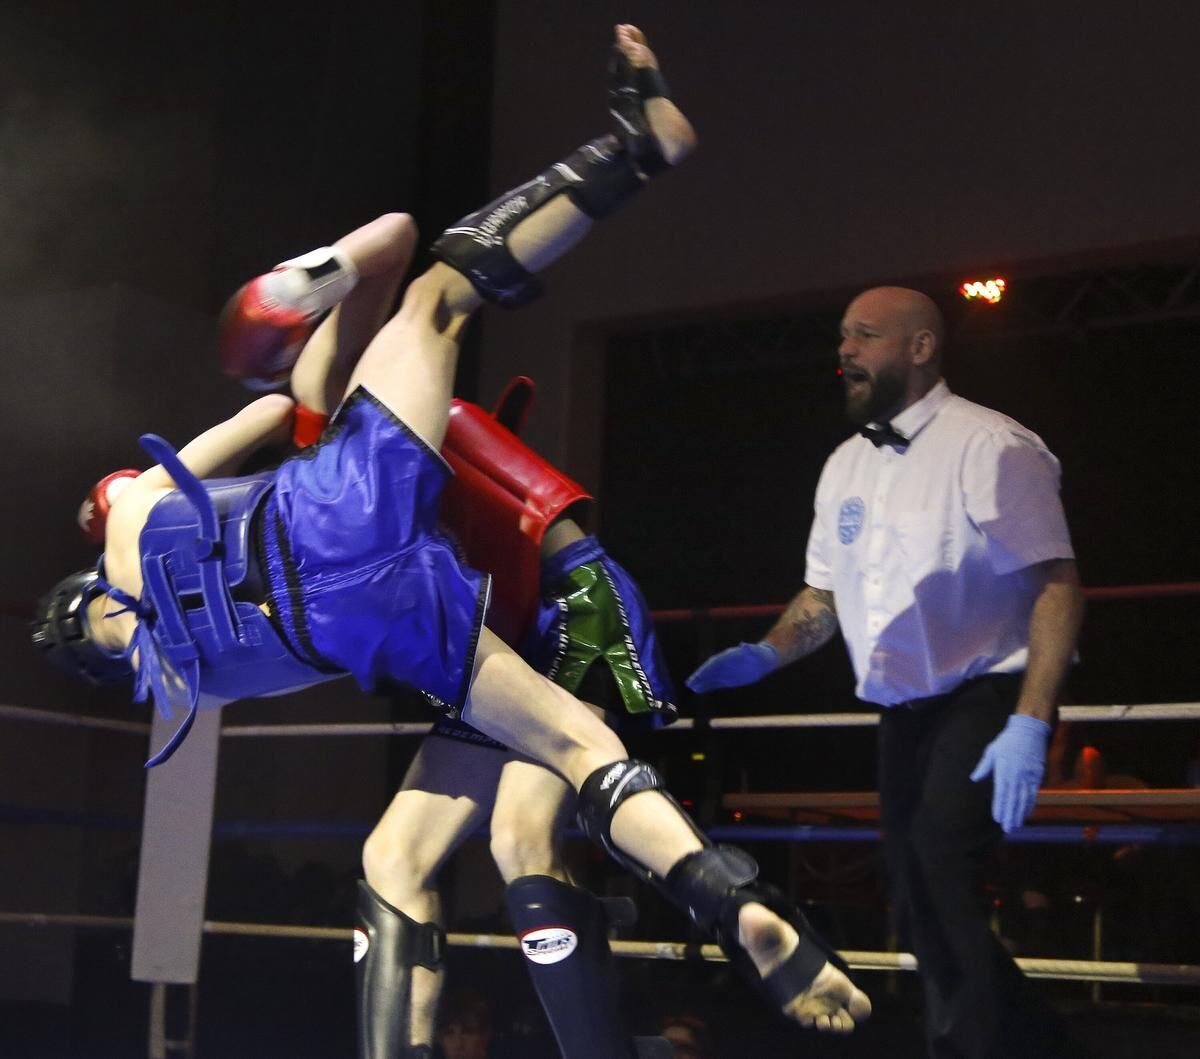 Peterborough crowd roars for young kick-boxers in final round